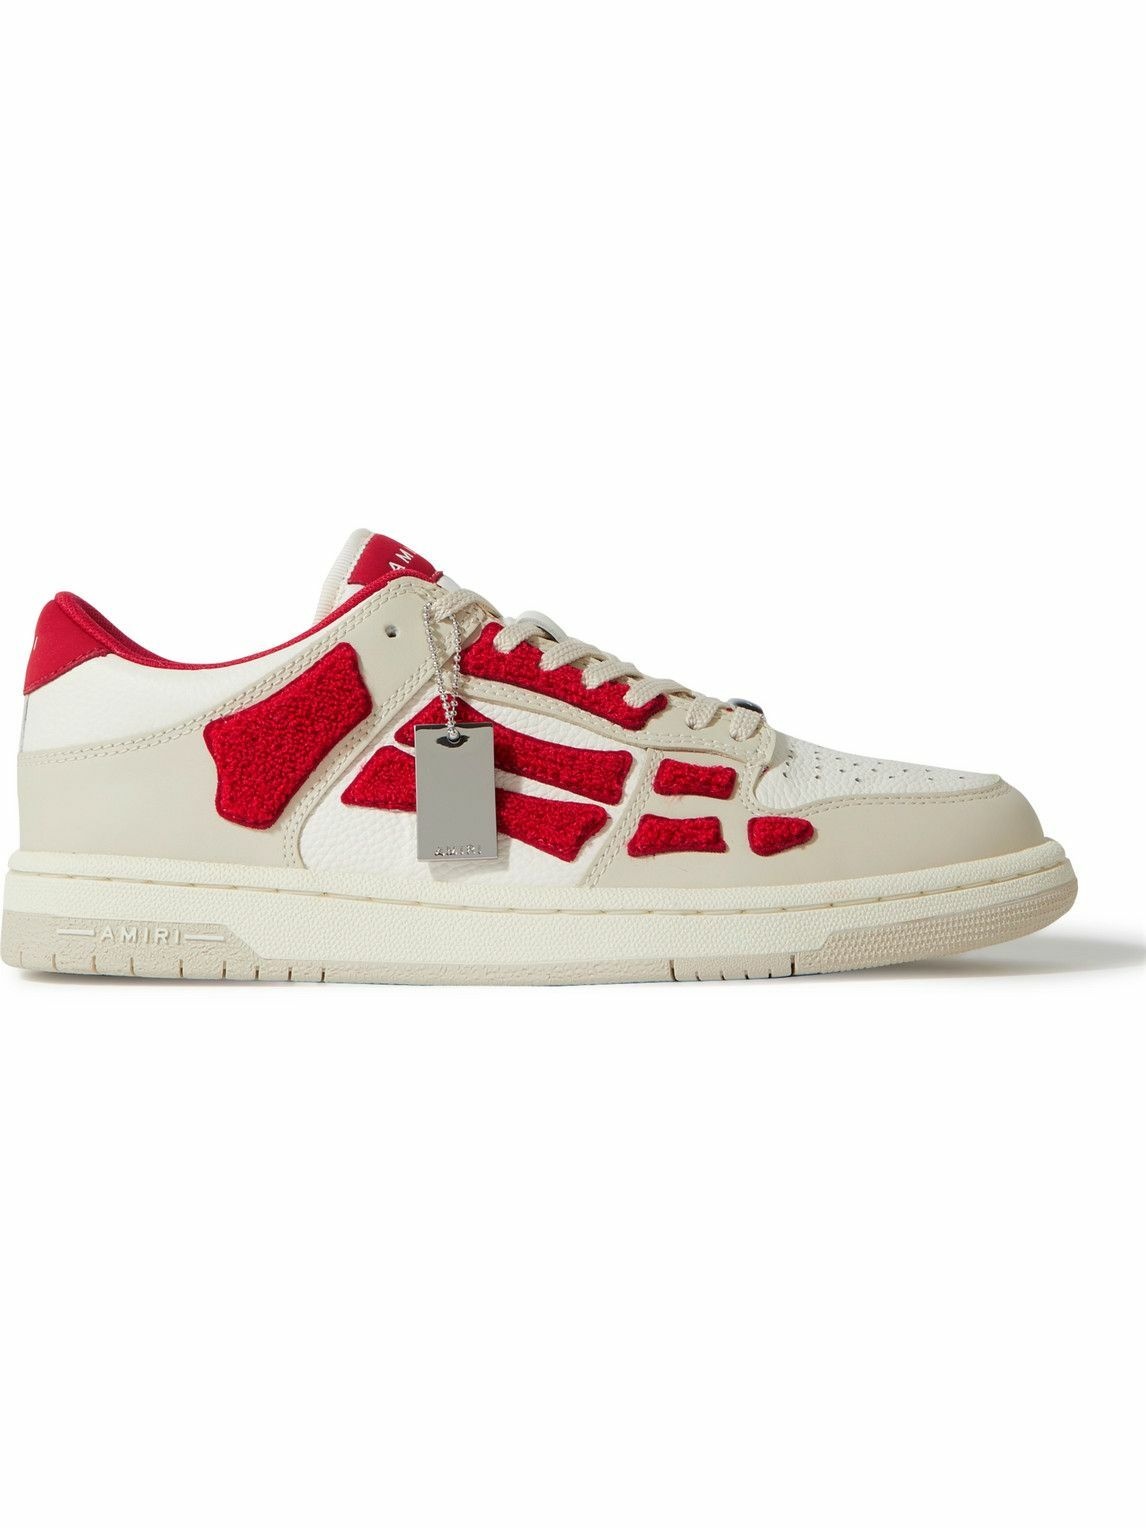 AMIRI - Skel-Top Colour-Block Leather and Bouclé Sneakers - Red Amiri